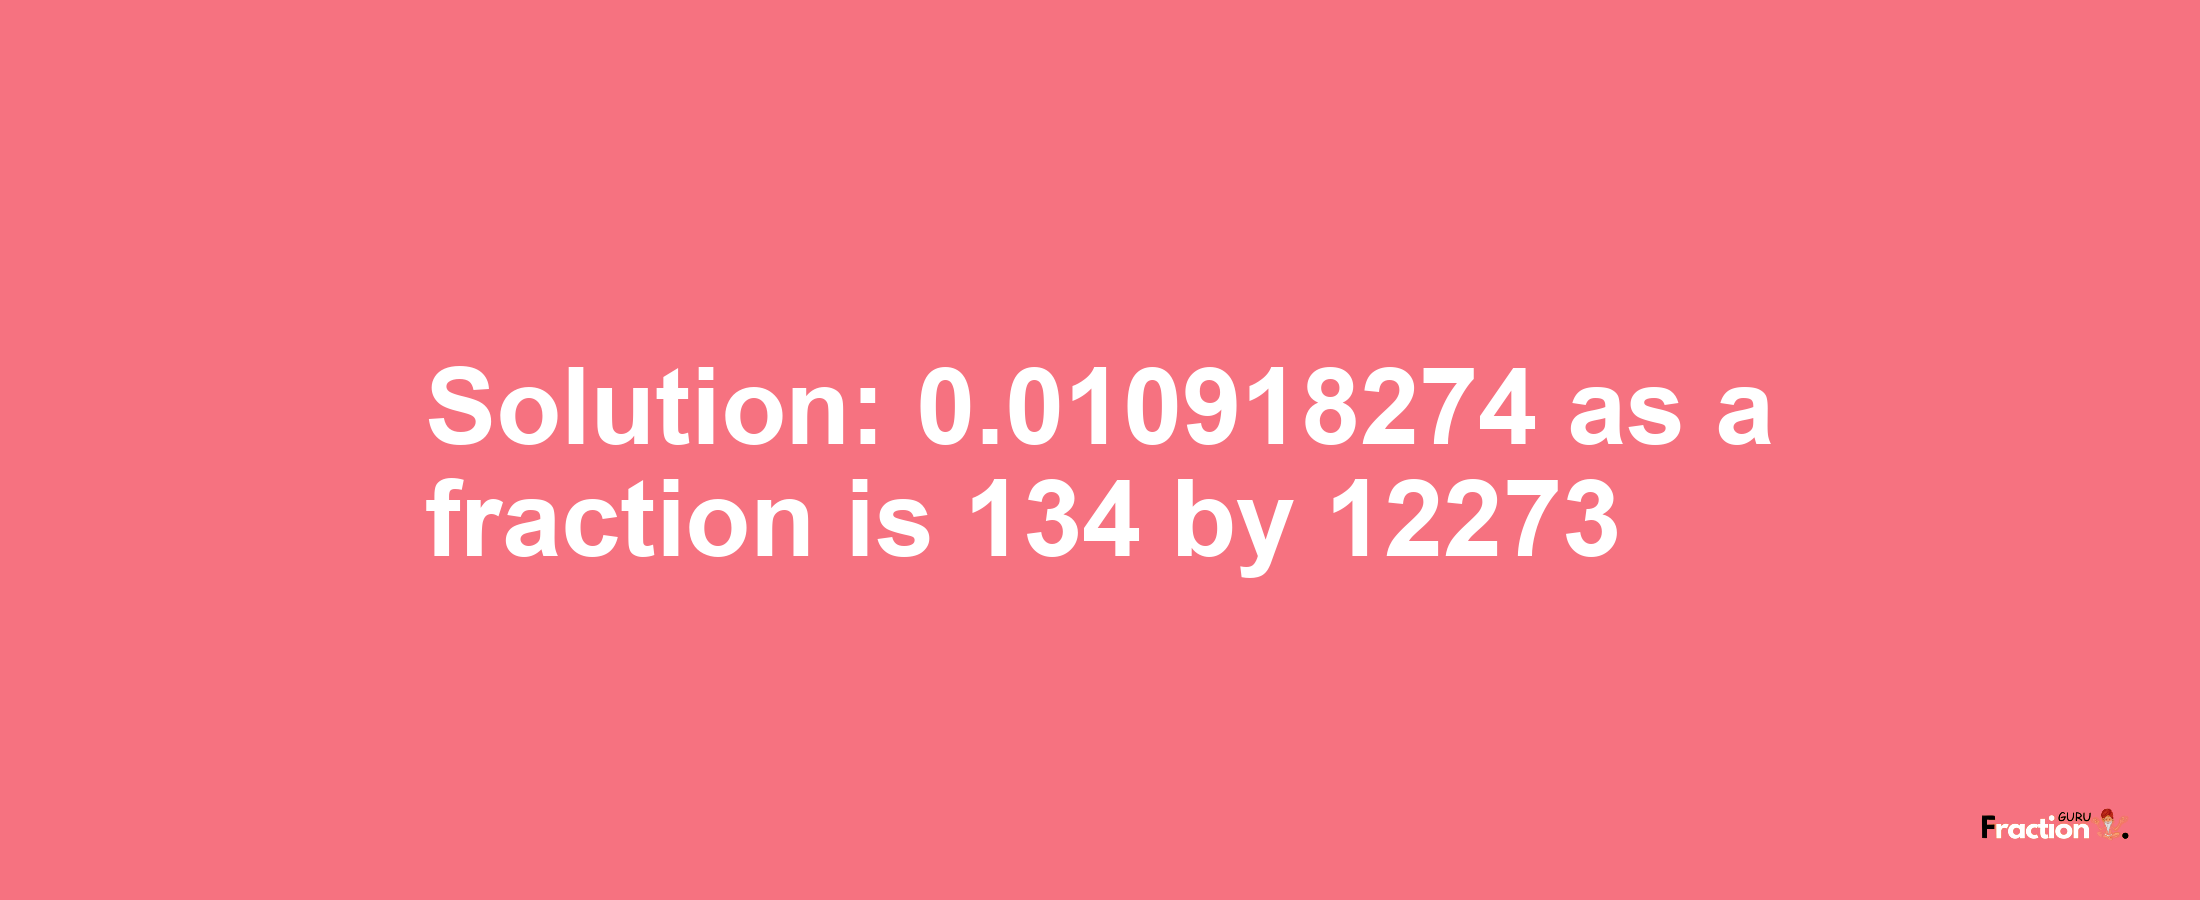 Solution:0.010918274 as a fraction is 134/12273